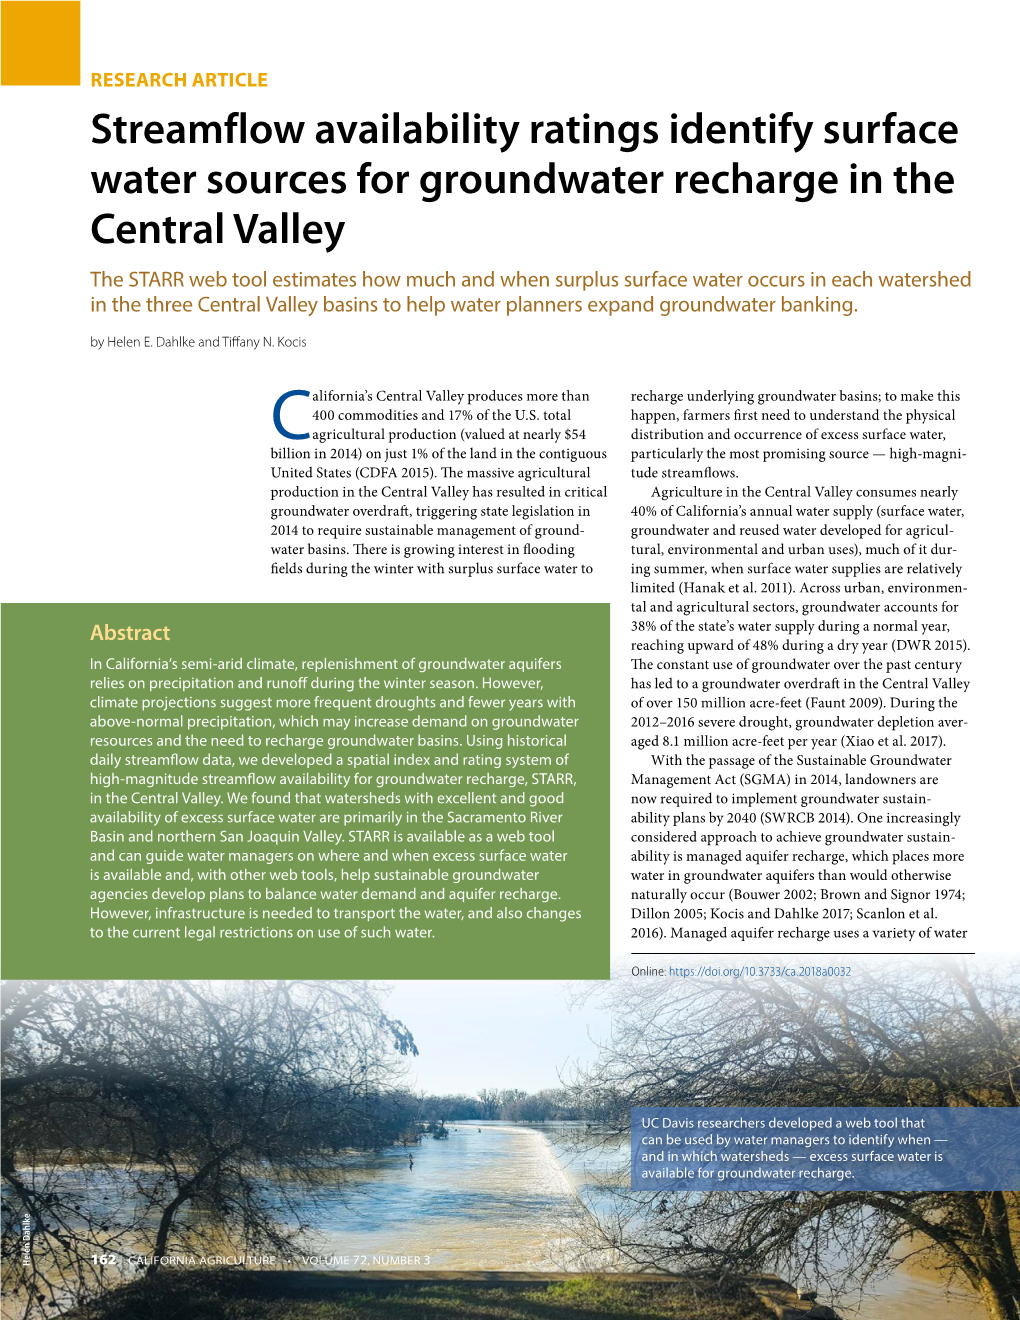 Streamflow Availability Ratings Identify Surface Water Sources for Groundwater Recharge in the Central Valley